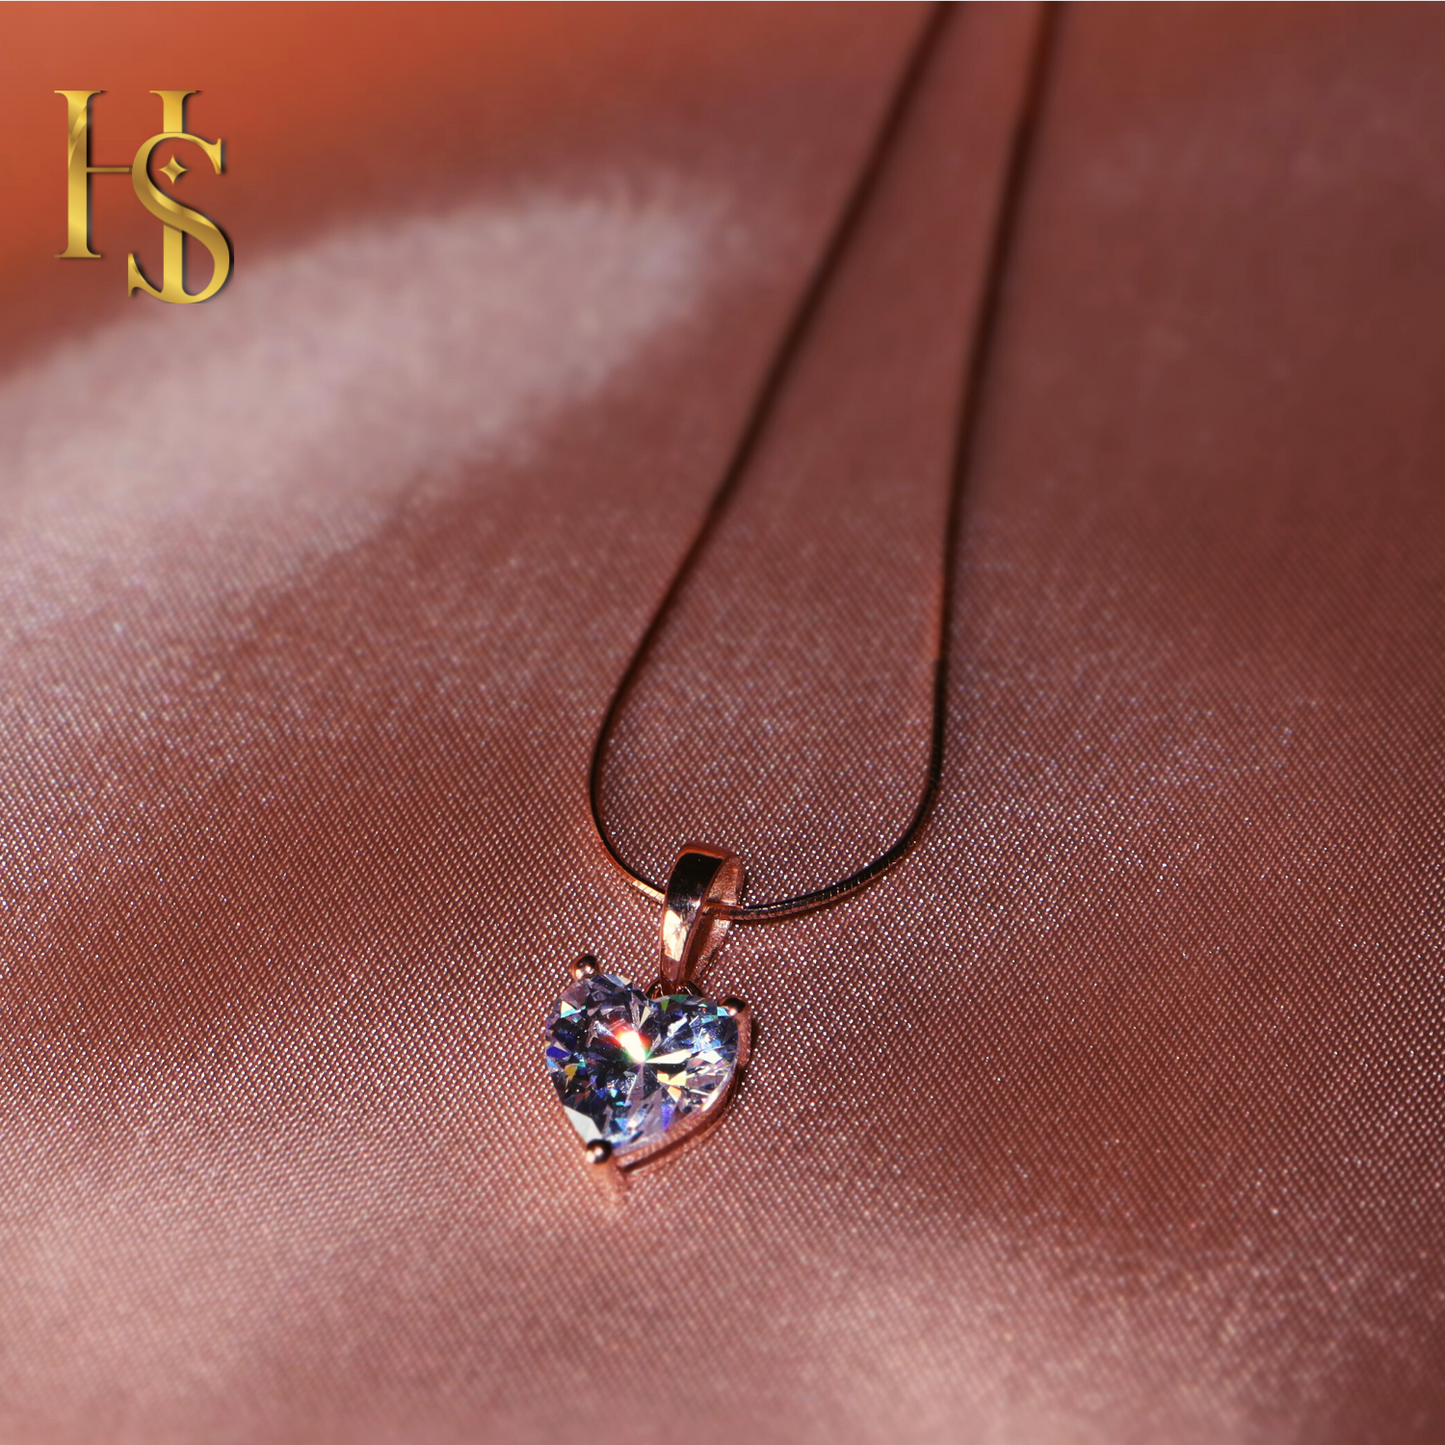 Rose Gold Heart Solitaire Pendant with Chain in 92.5 Silver embellished with Swarovski Zirconia - 18K Rose Gold Finish